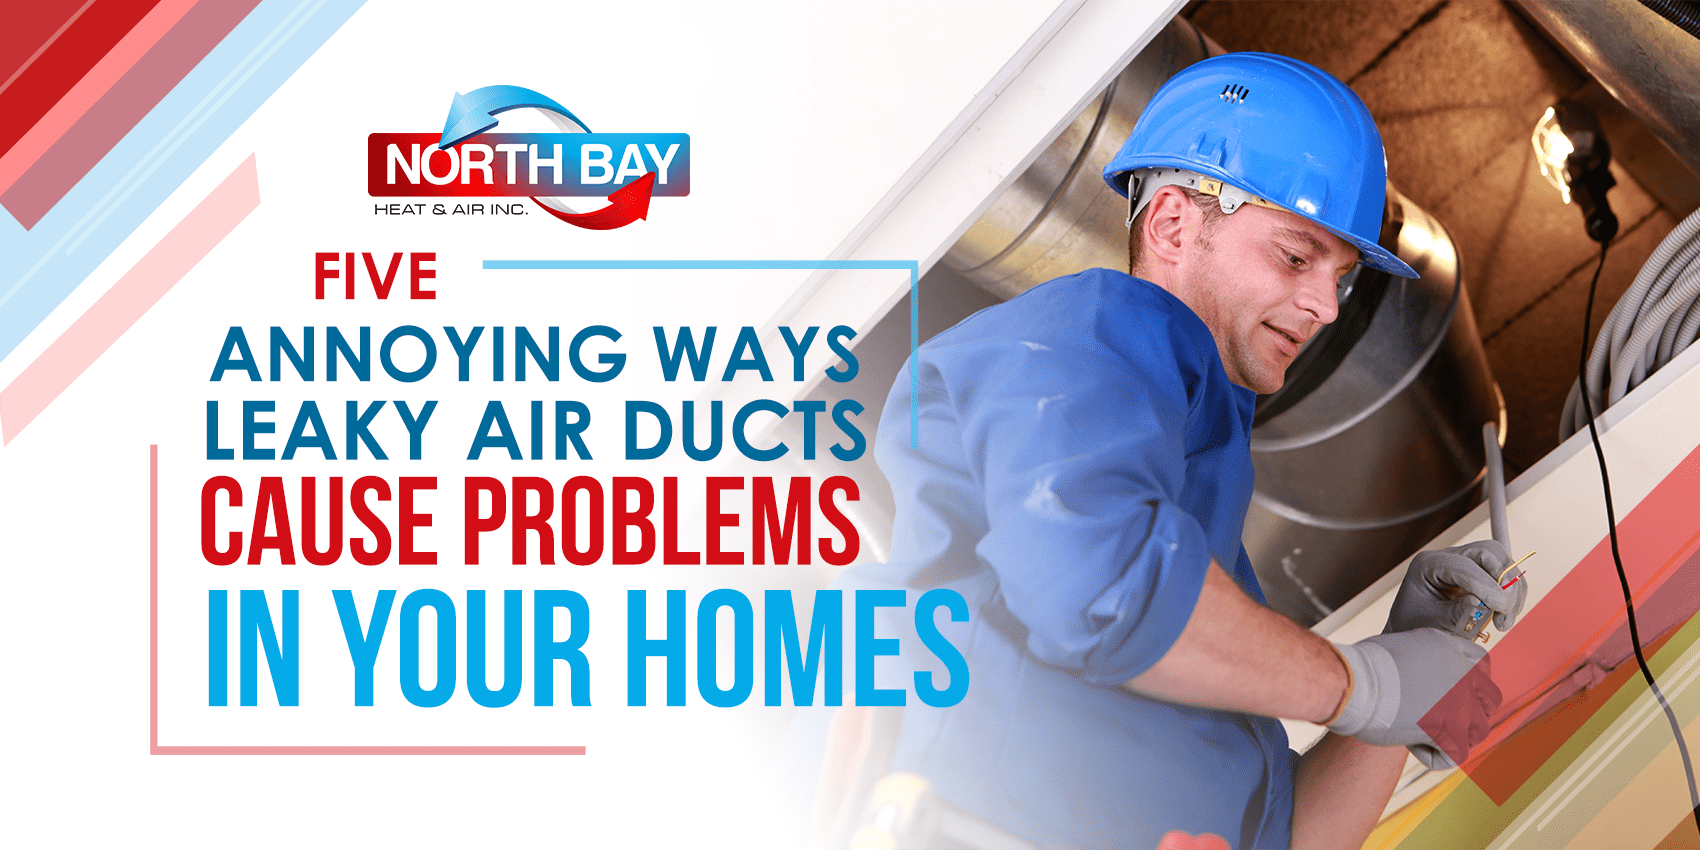 5 Annoying Ways Leaky Air Ducts Cause Problems in Your Home